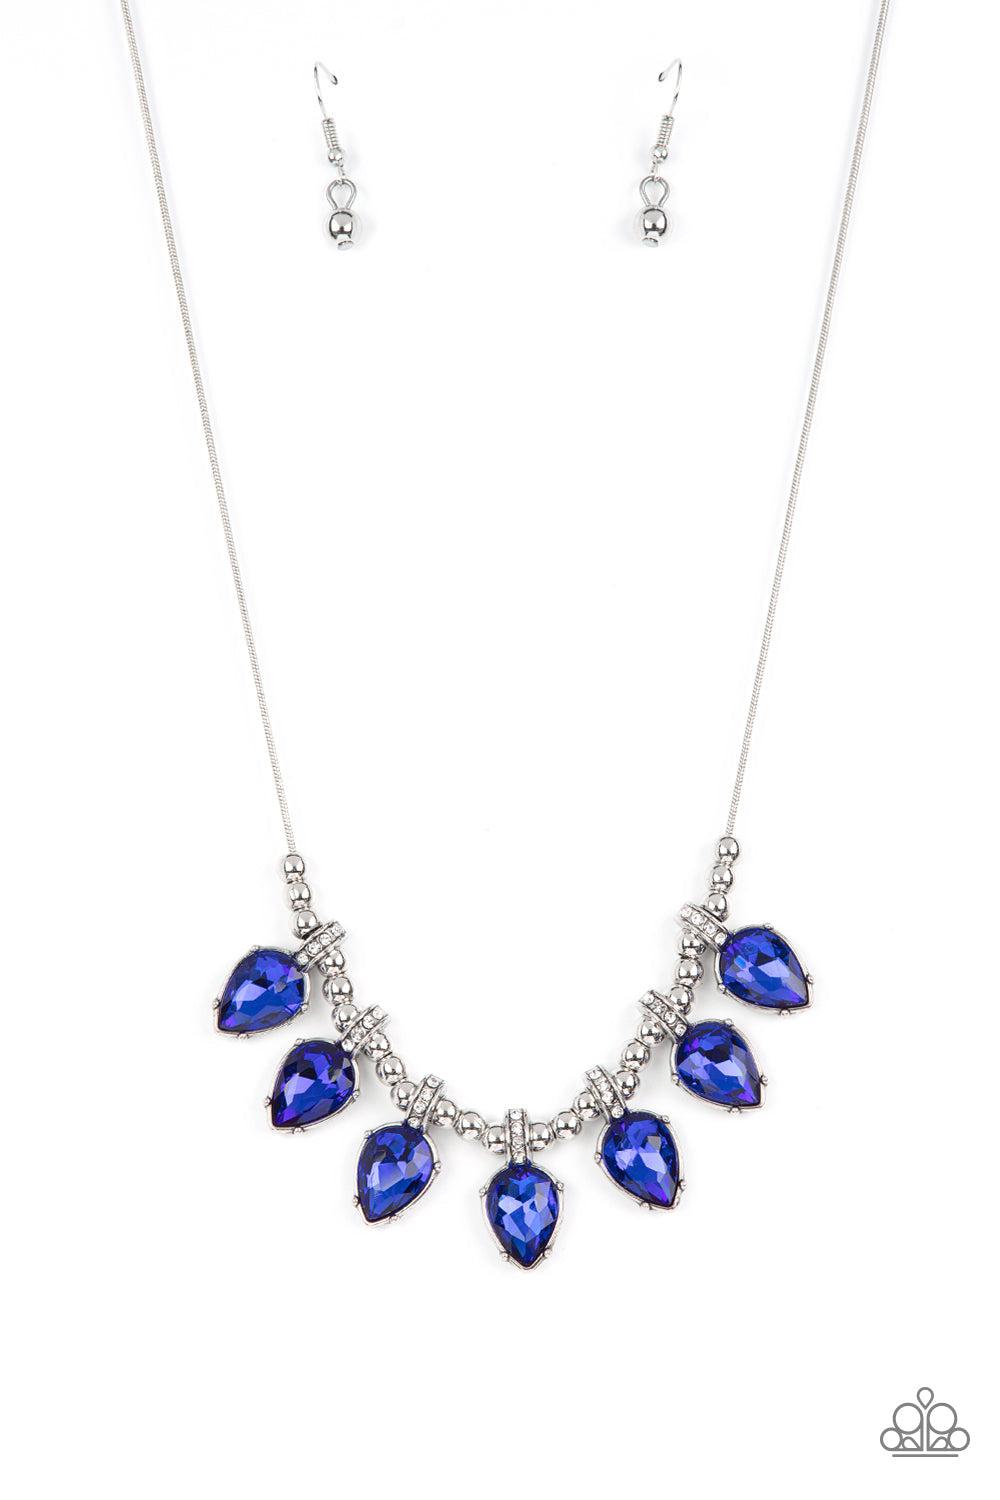 Crown Jewel Couture Blue Rhinestone Necklace - Paparazzi Accessories- lightbox - CarasShop.com - $5 Jewelry by Cara Jewels